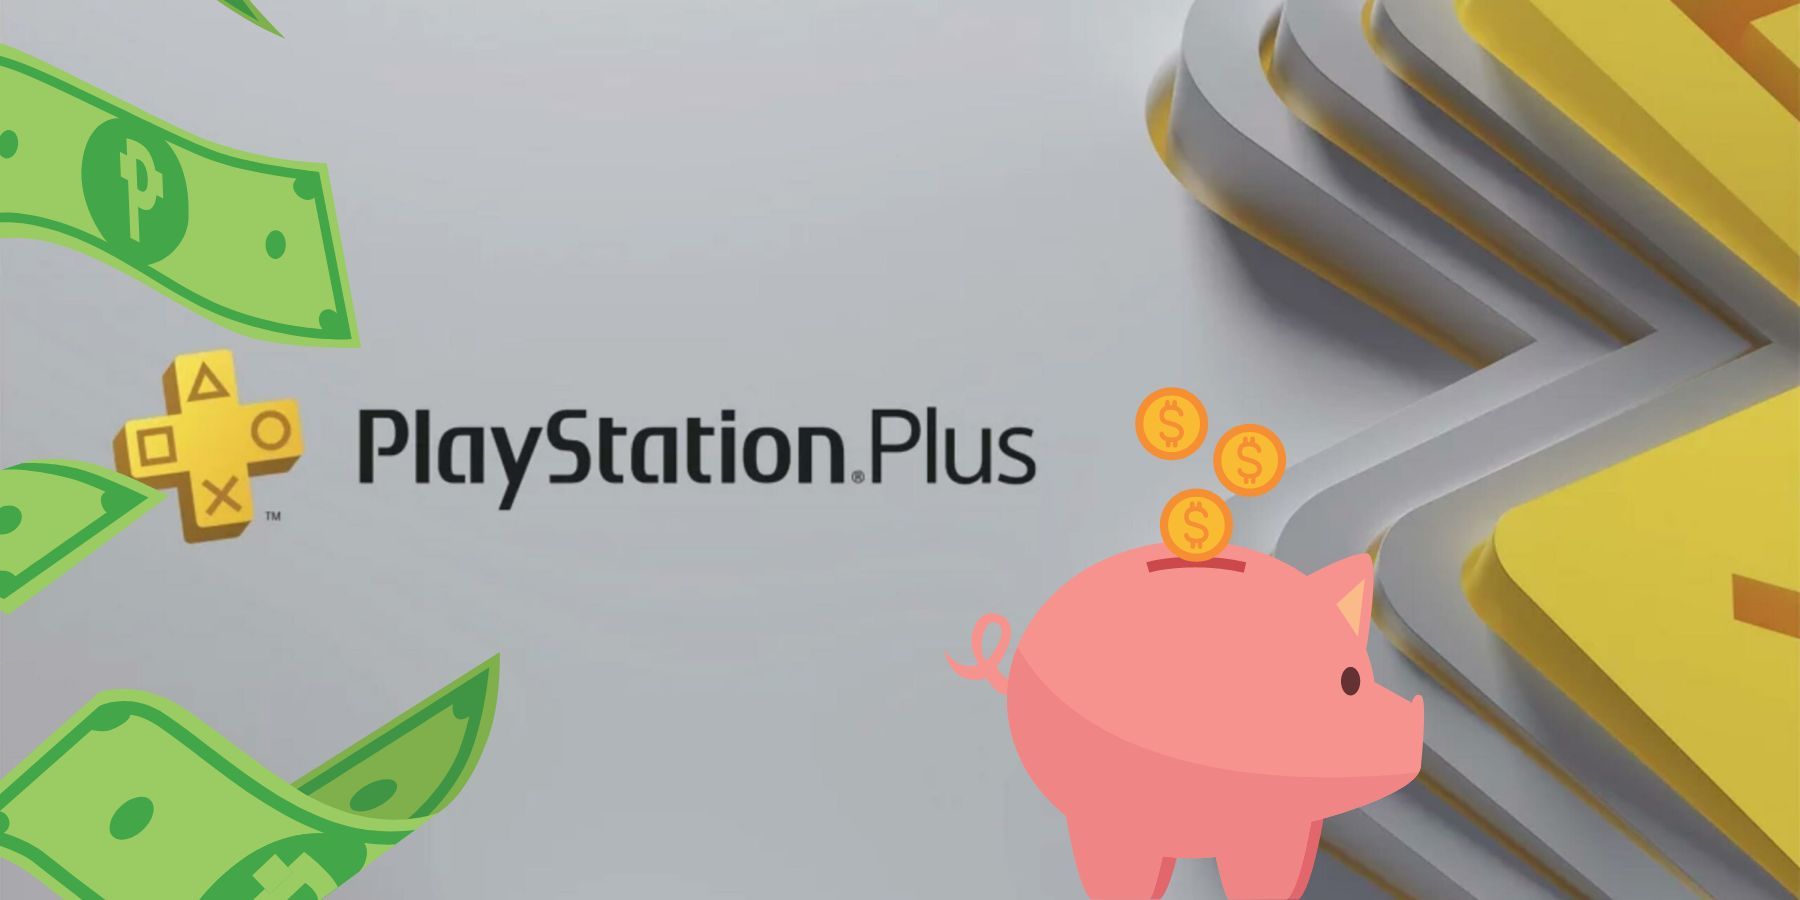 Sony Announces Price Hike For PlayStation Plus 12-Month Subscriptions  Across All Tiers - MySmartPrice